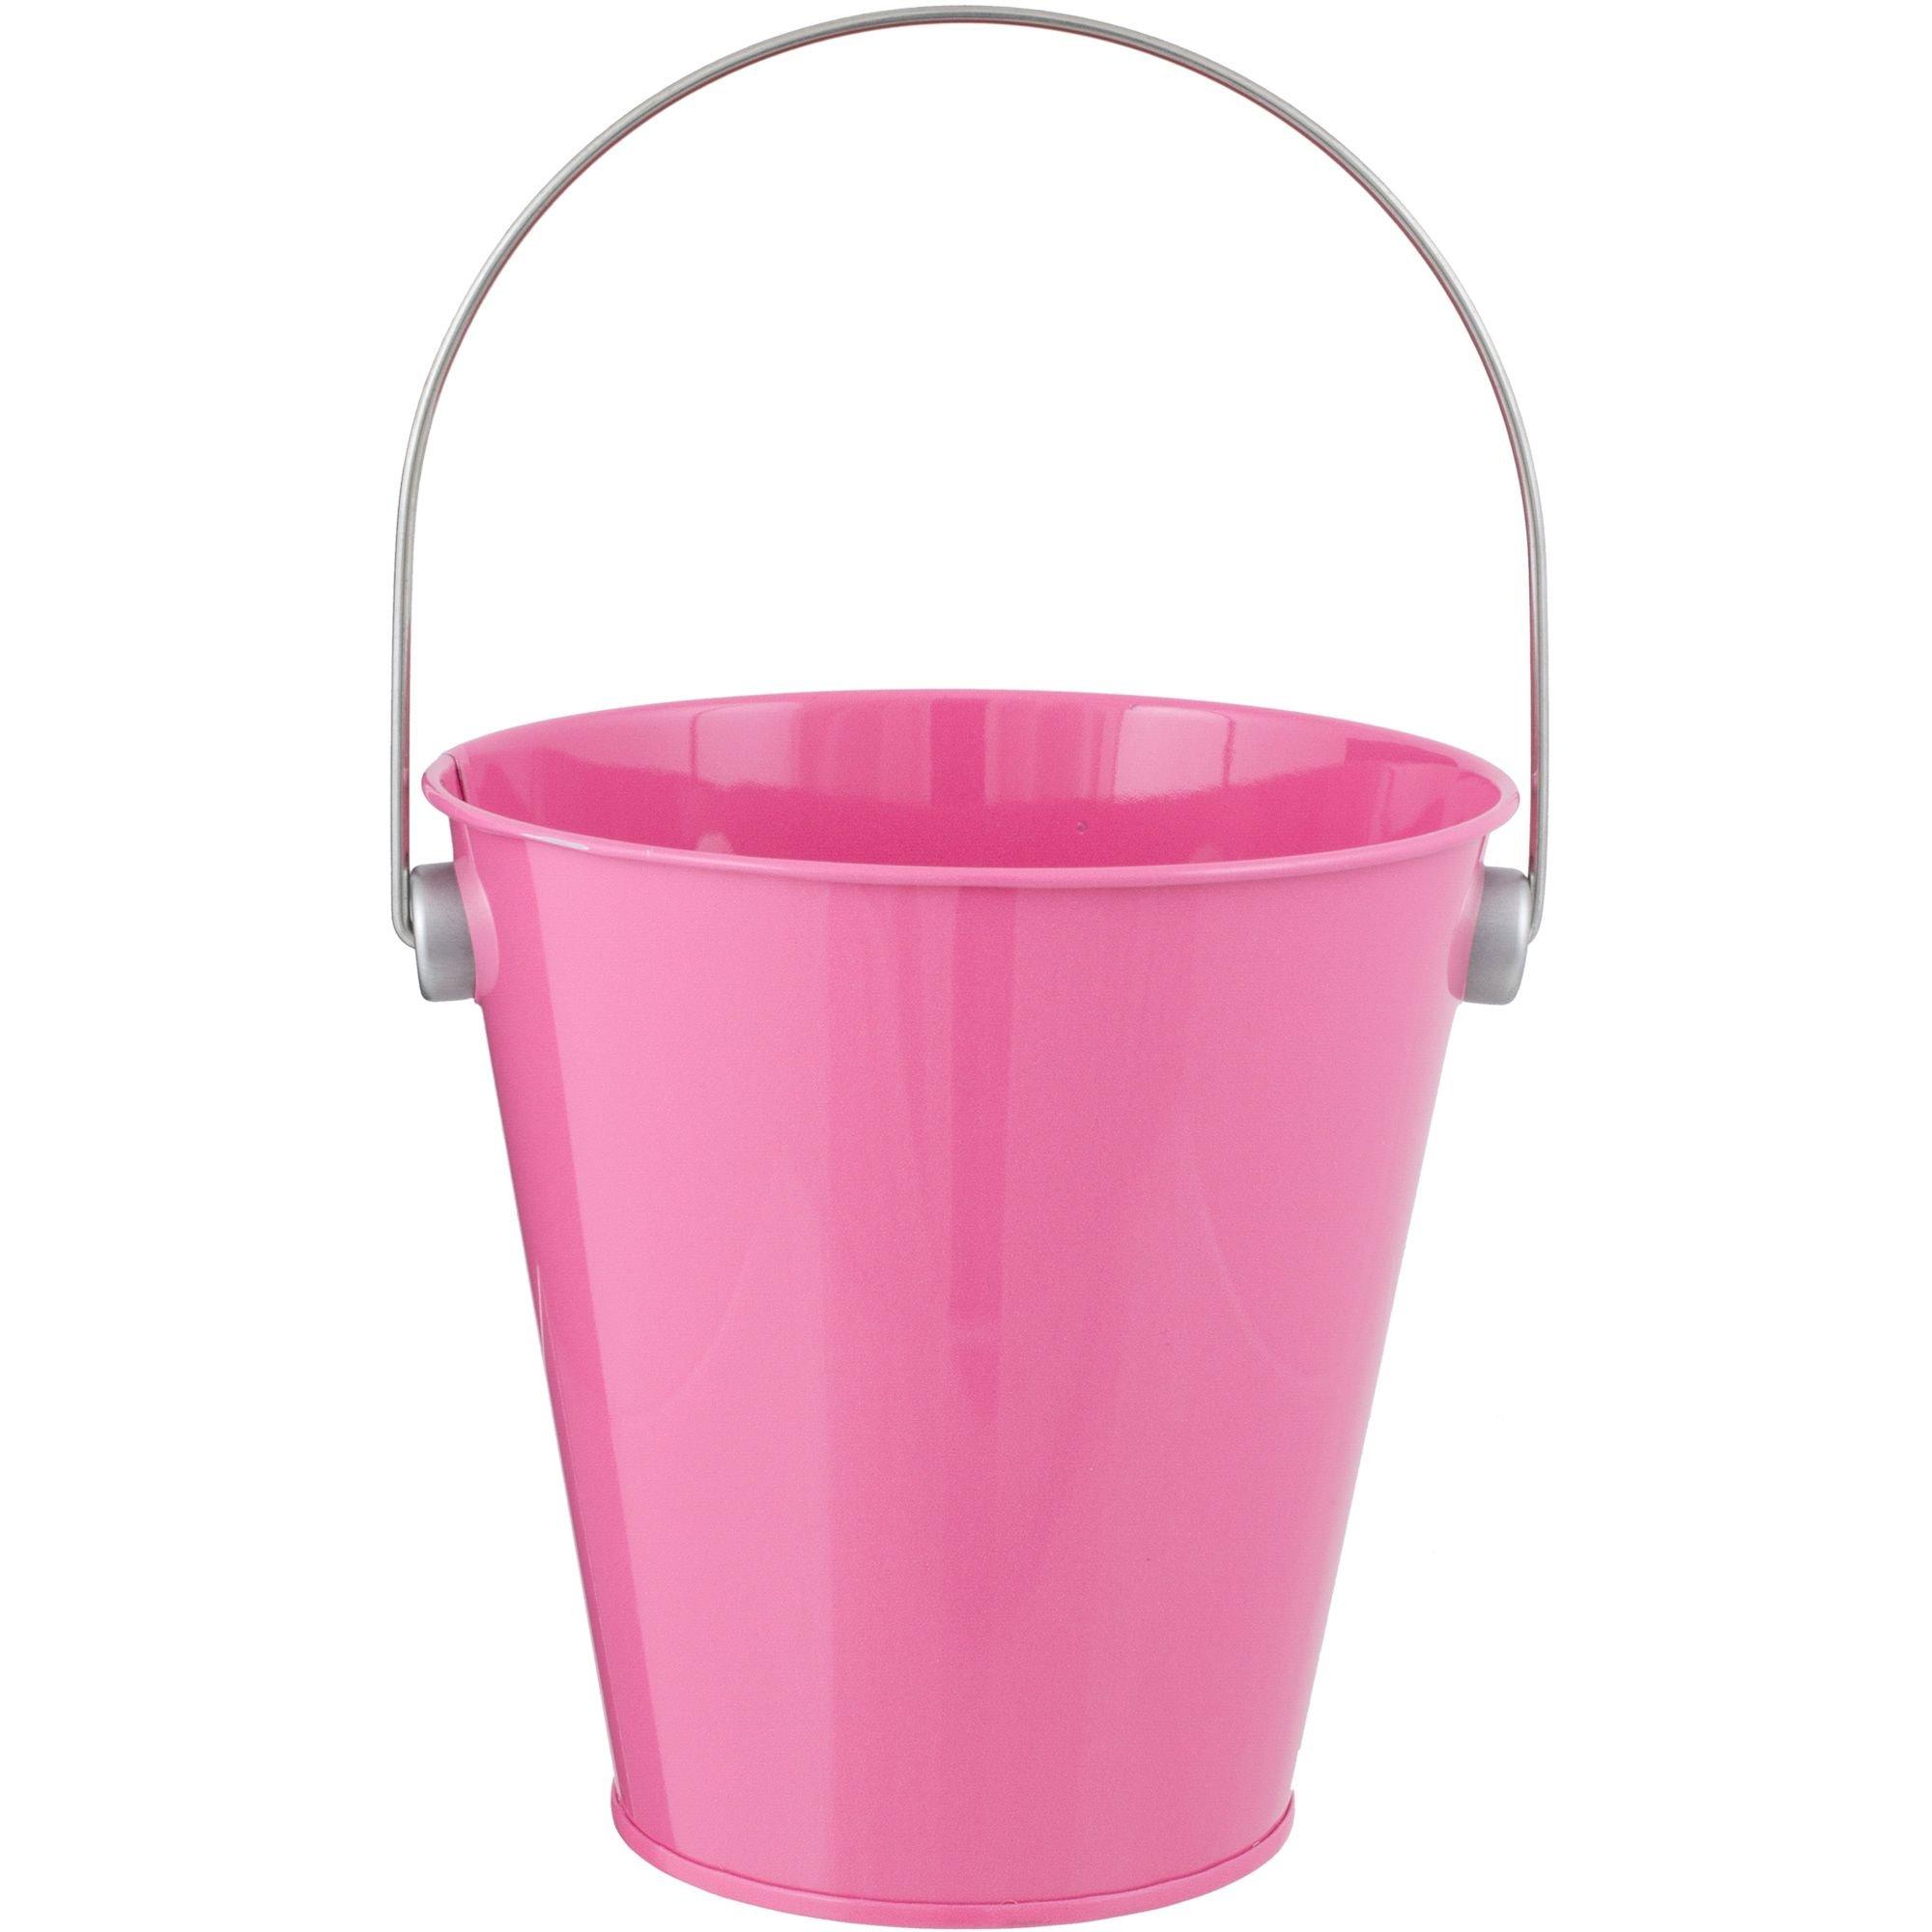 Polka Dot Metal Pail Buckets Party Favor, 5-inch (Hot Pink)